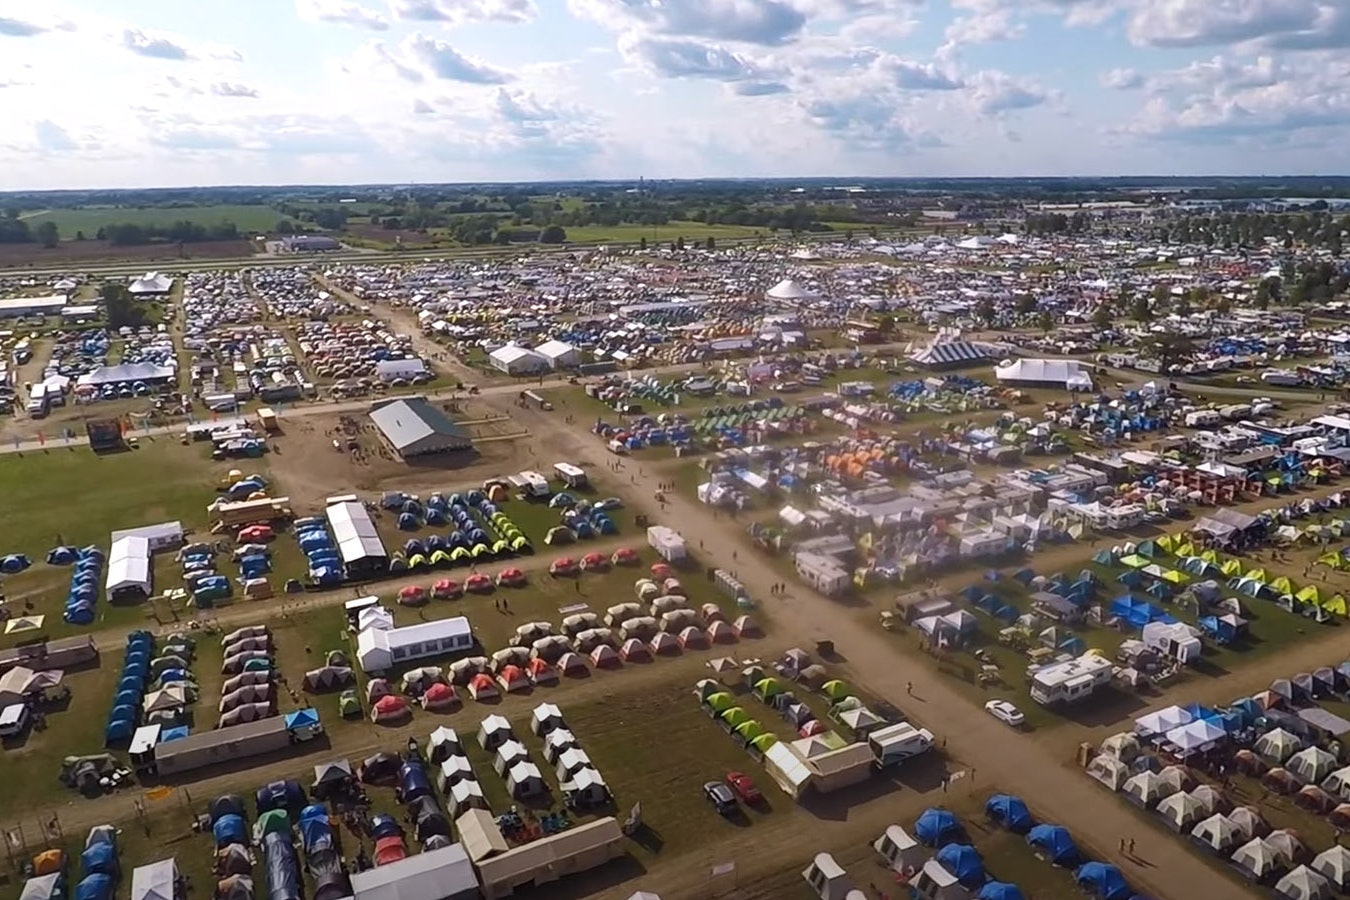 Held every five years, the International Pathfinders Camporee event draws tens of thousands of people. The last event in Oshkosh, Wisconsin, had 55,000 attendees.